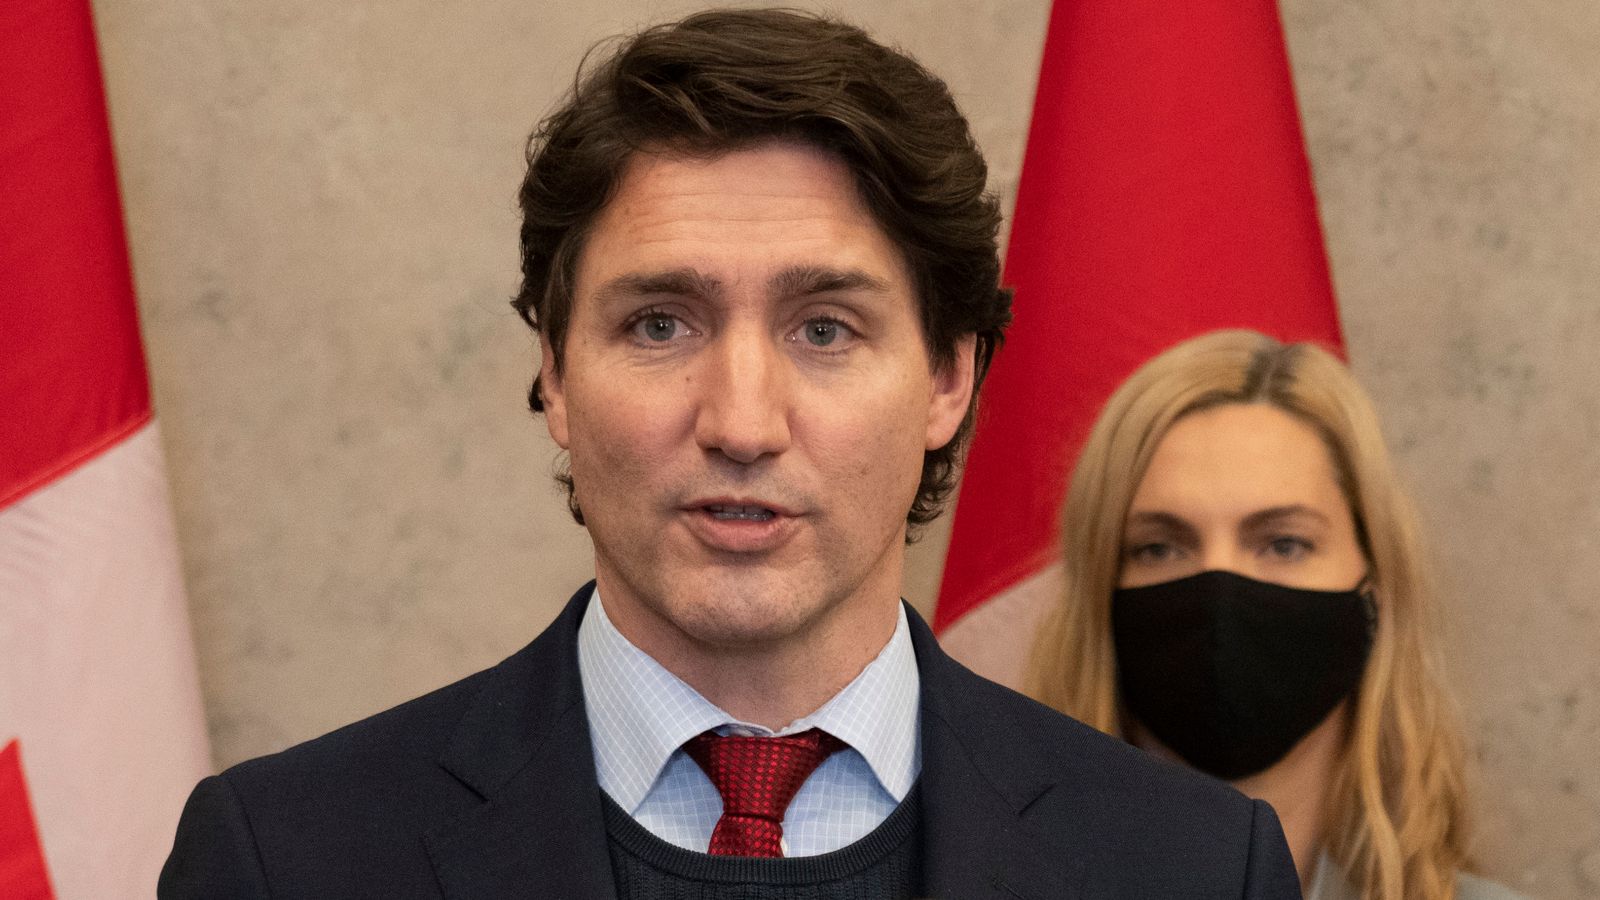 Winter Olympics: Canada to join diplomatic boycott of Games in Beijing, says Prime Minister Justin Trudeau